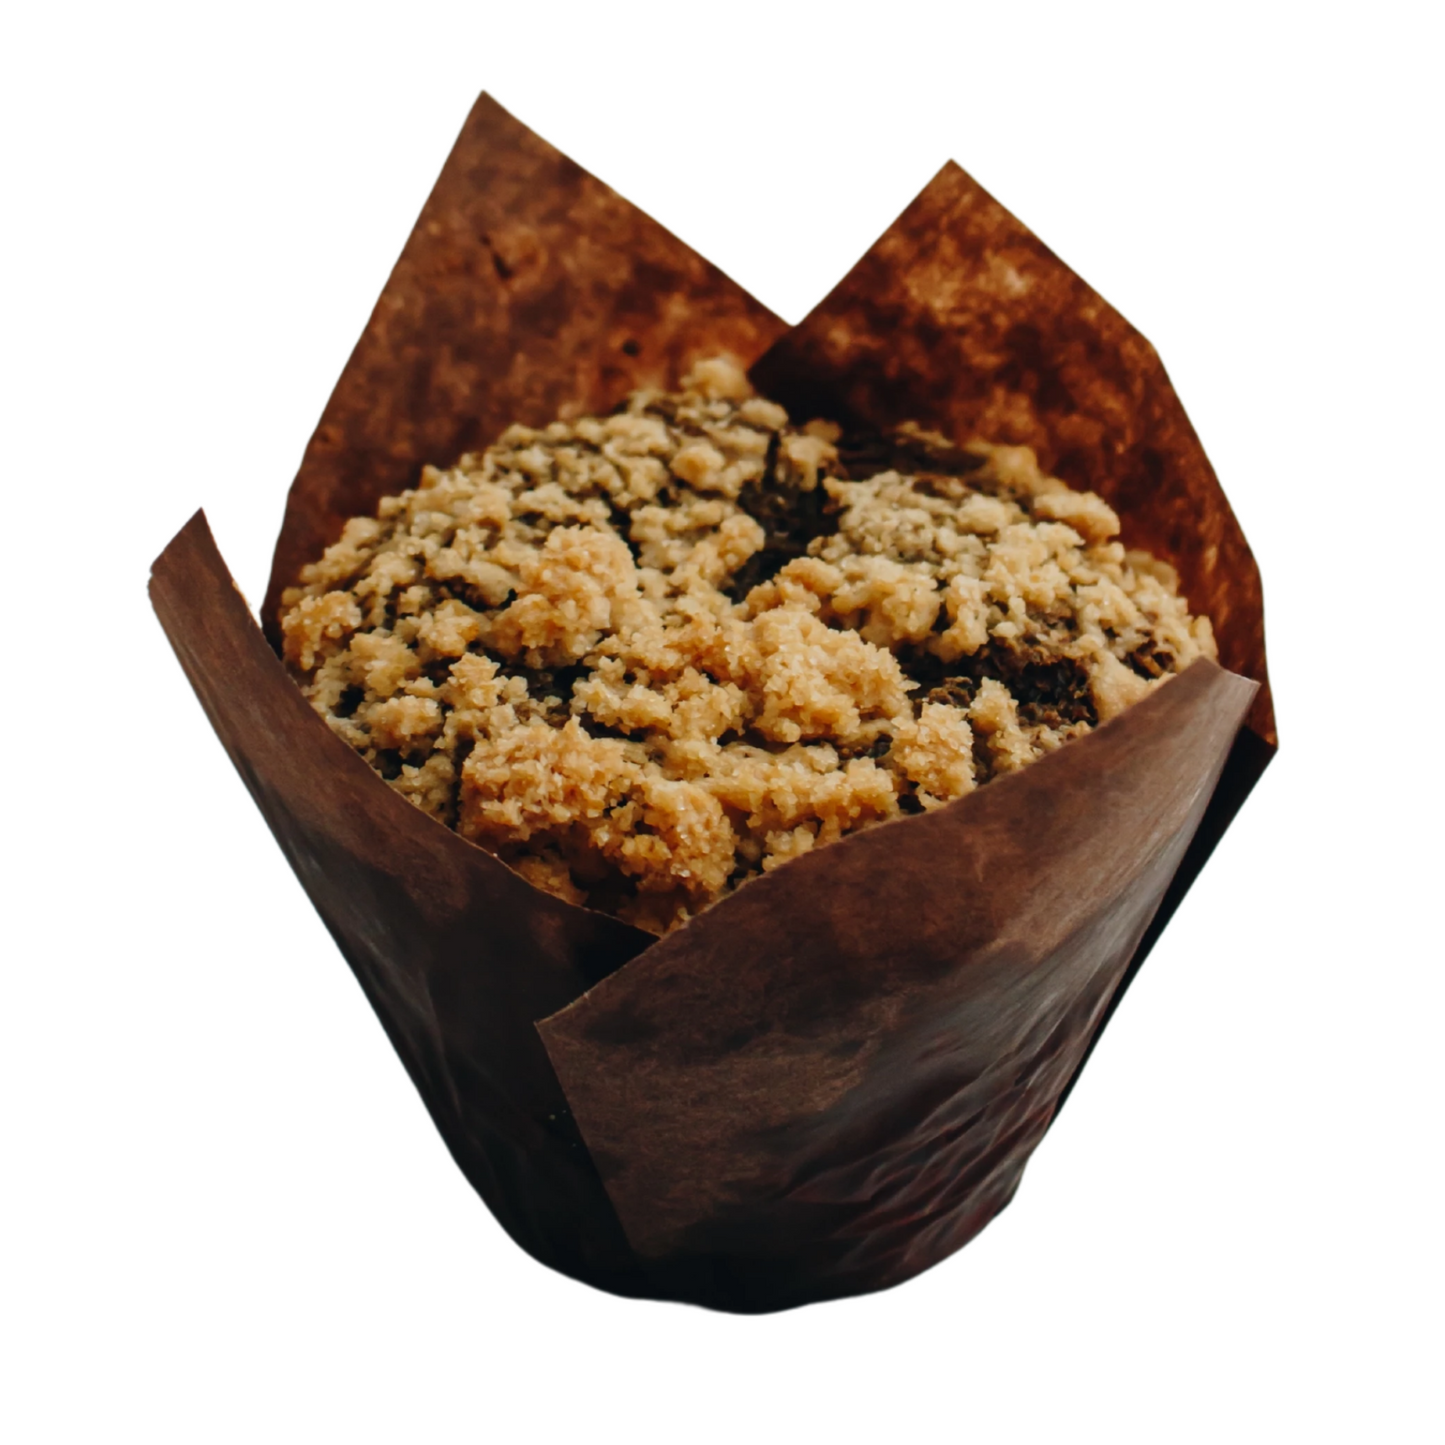 Blueberry Muffin - Jumbo - Cocoabeans Gluten-Free